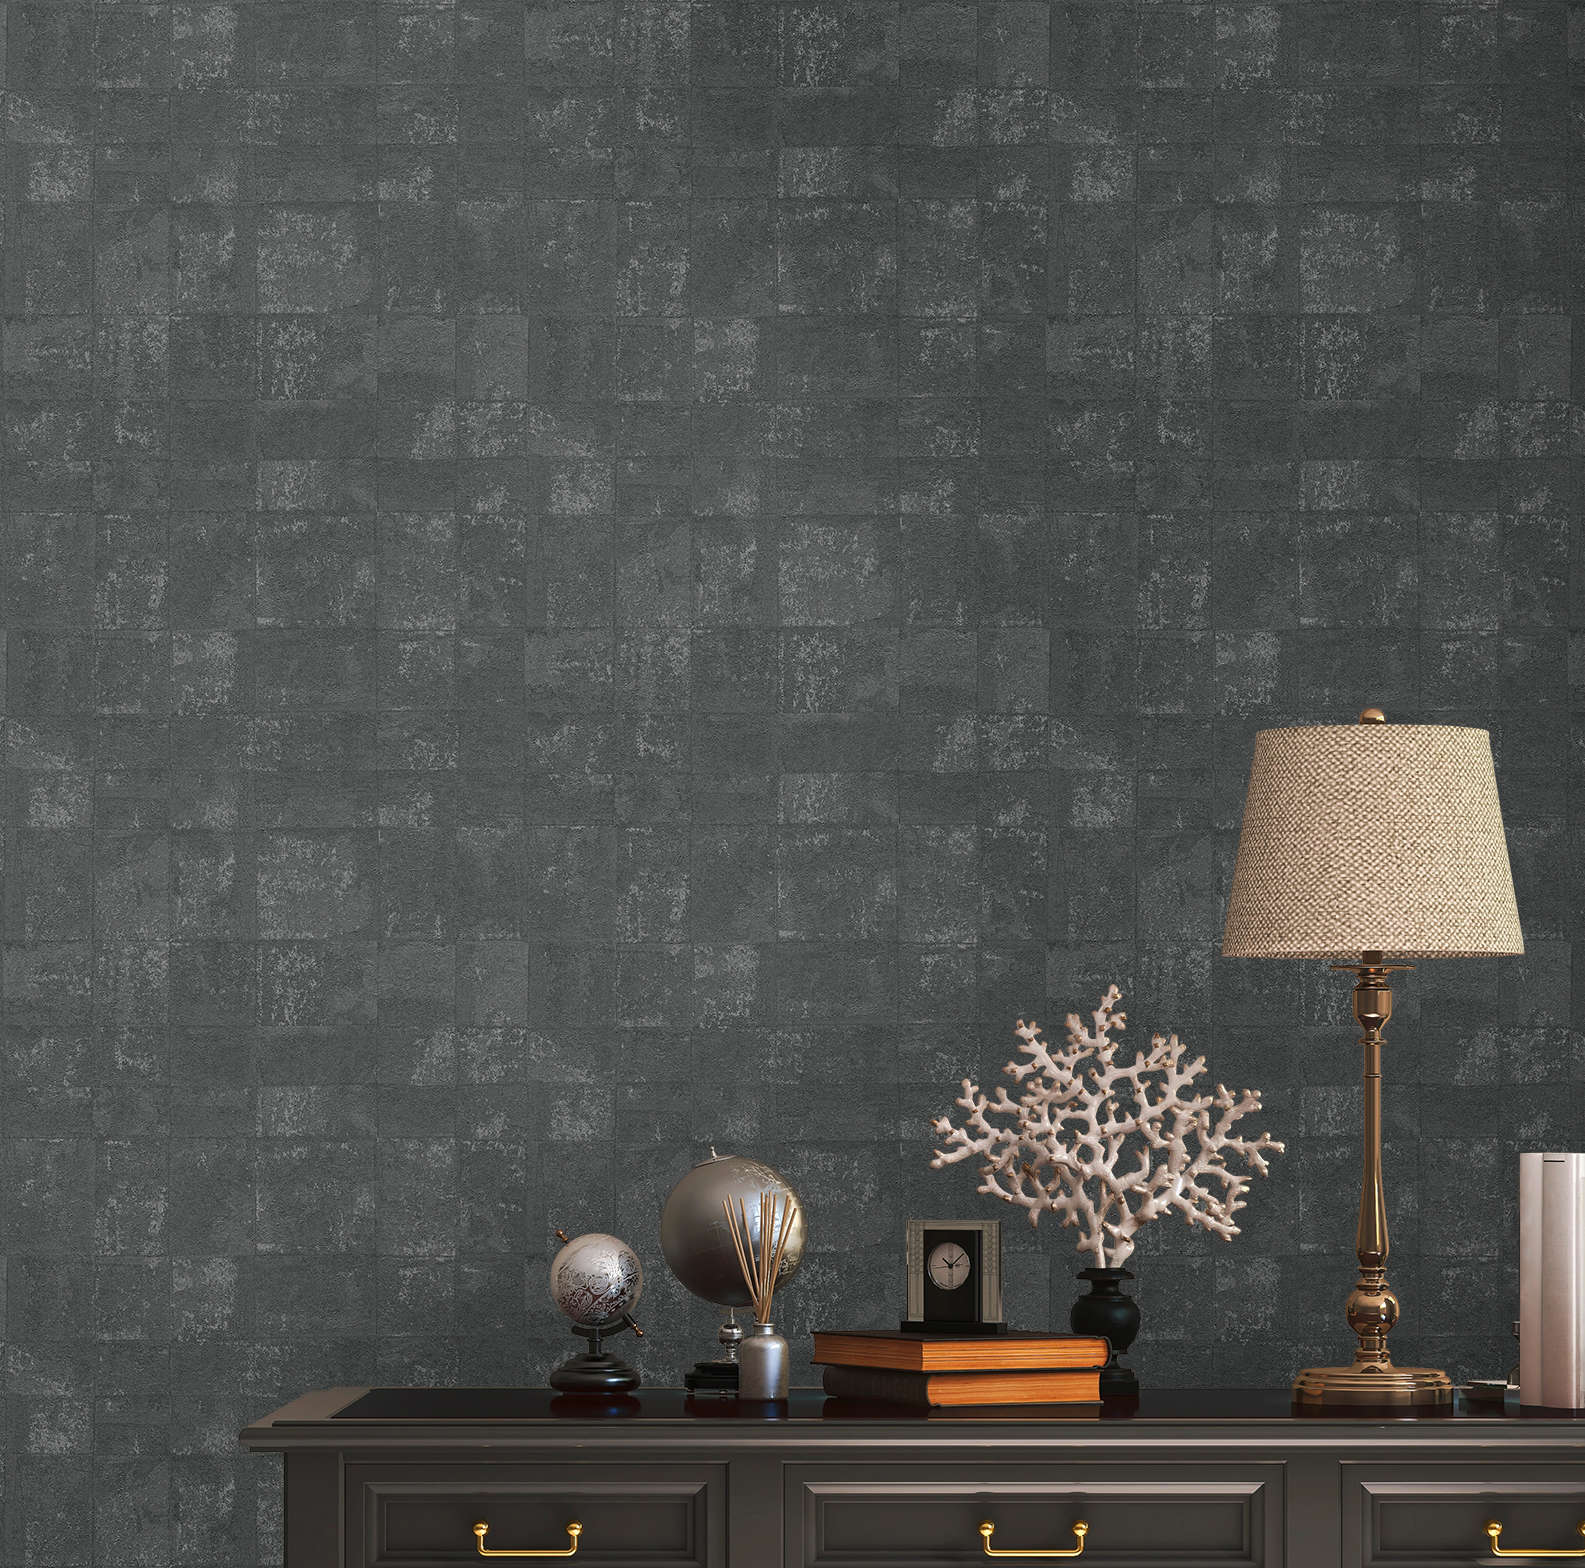             Non-woven wallpaper with tile look in industrial style - black
        